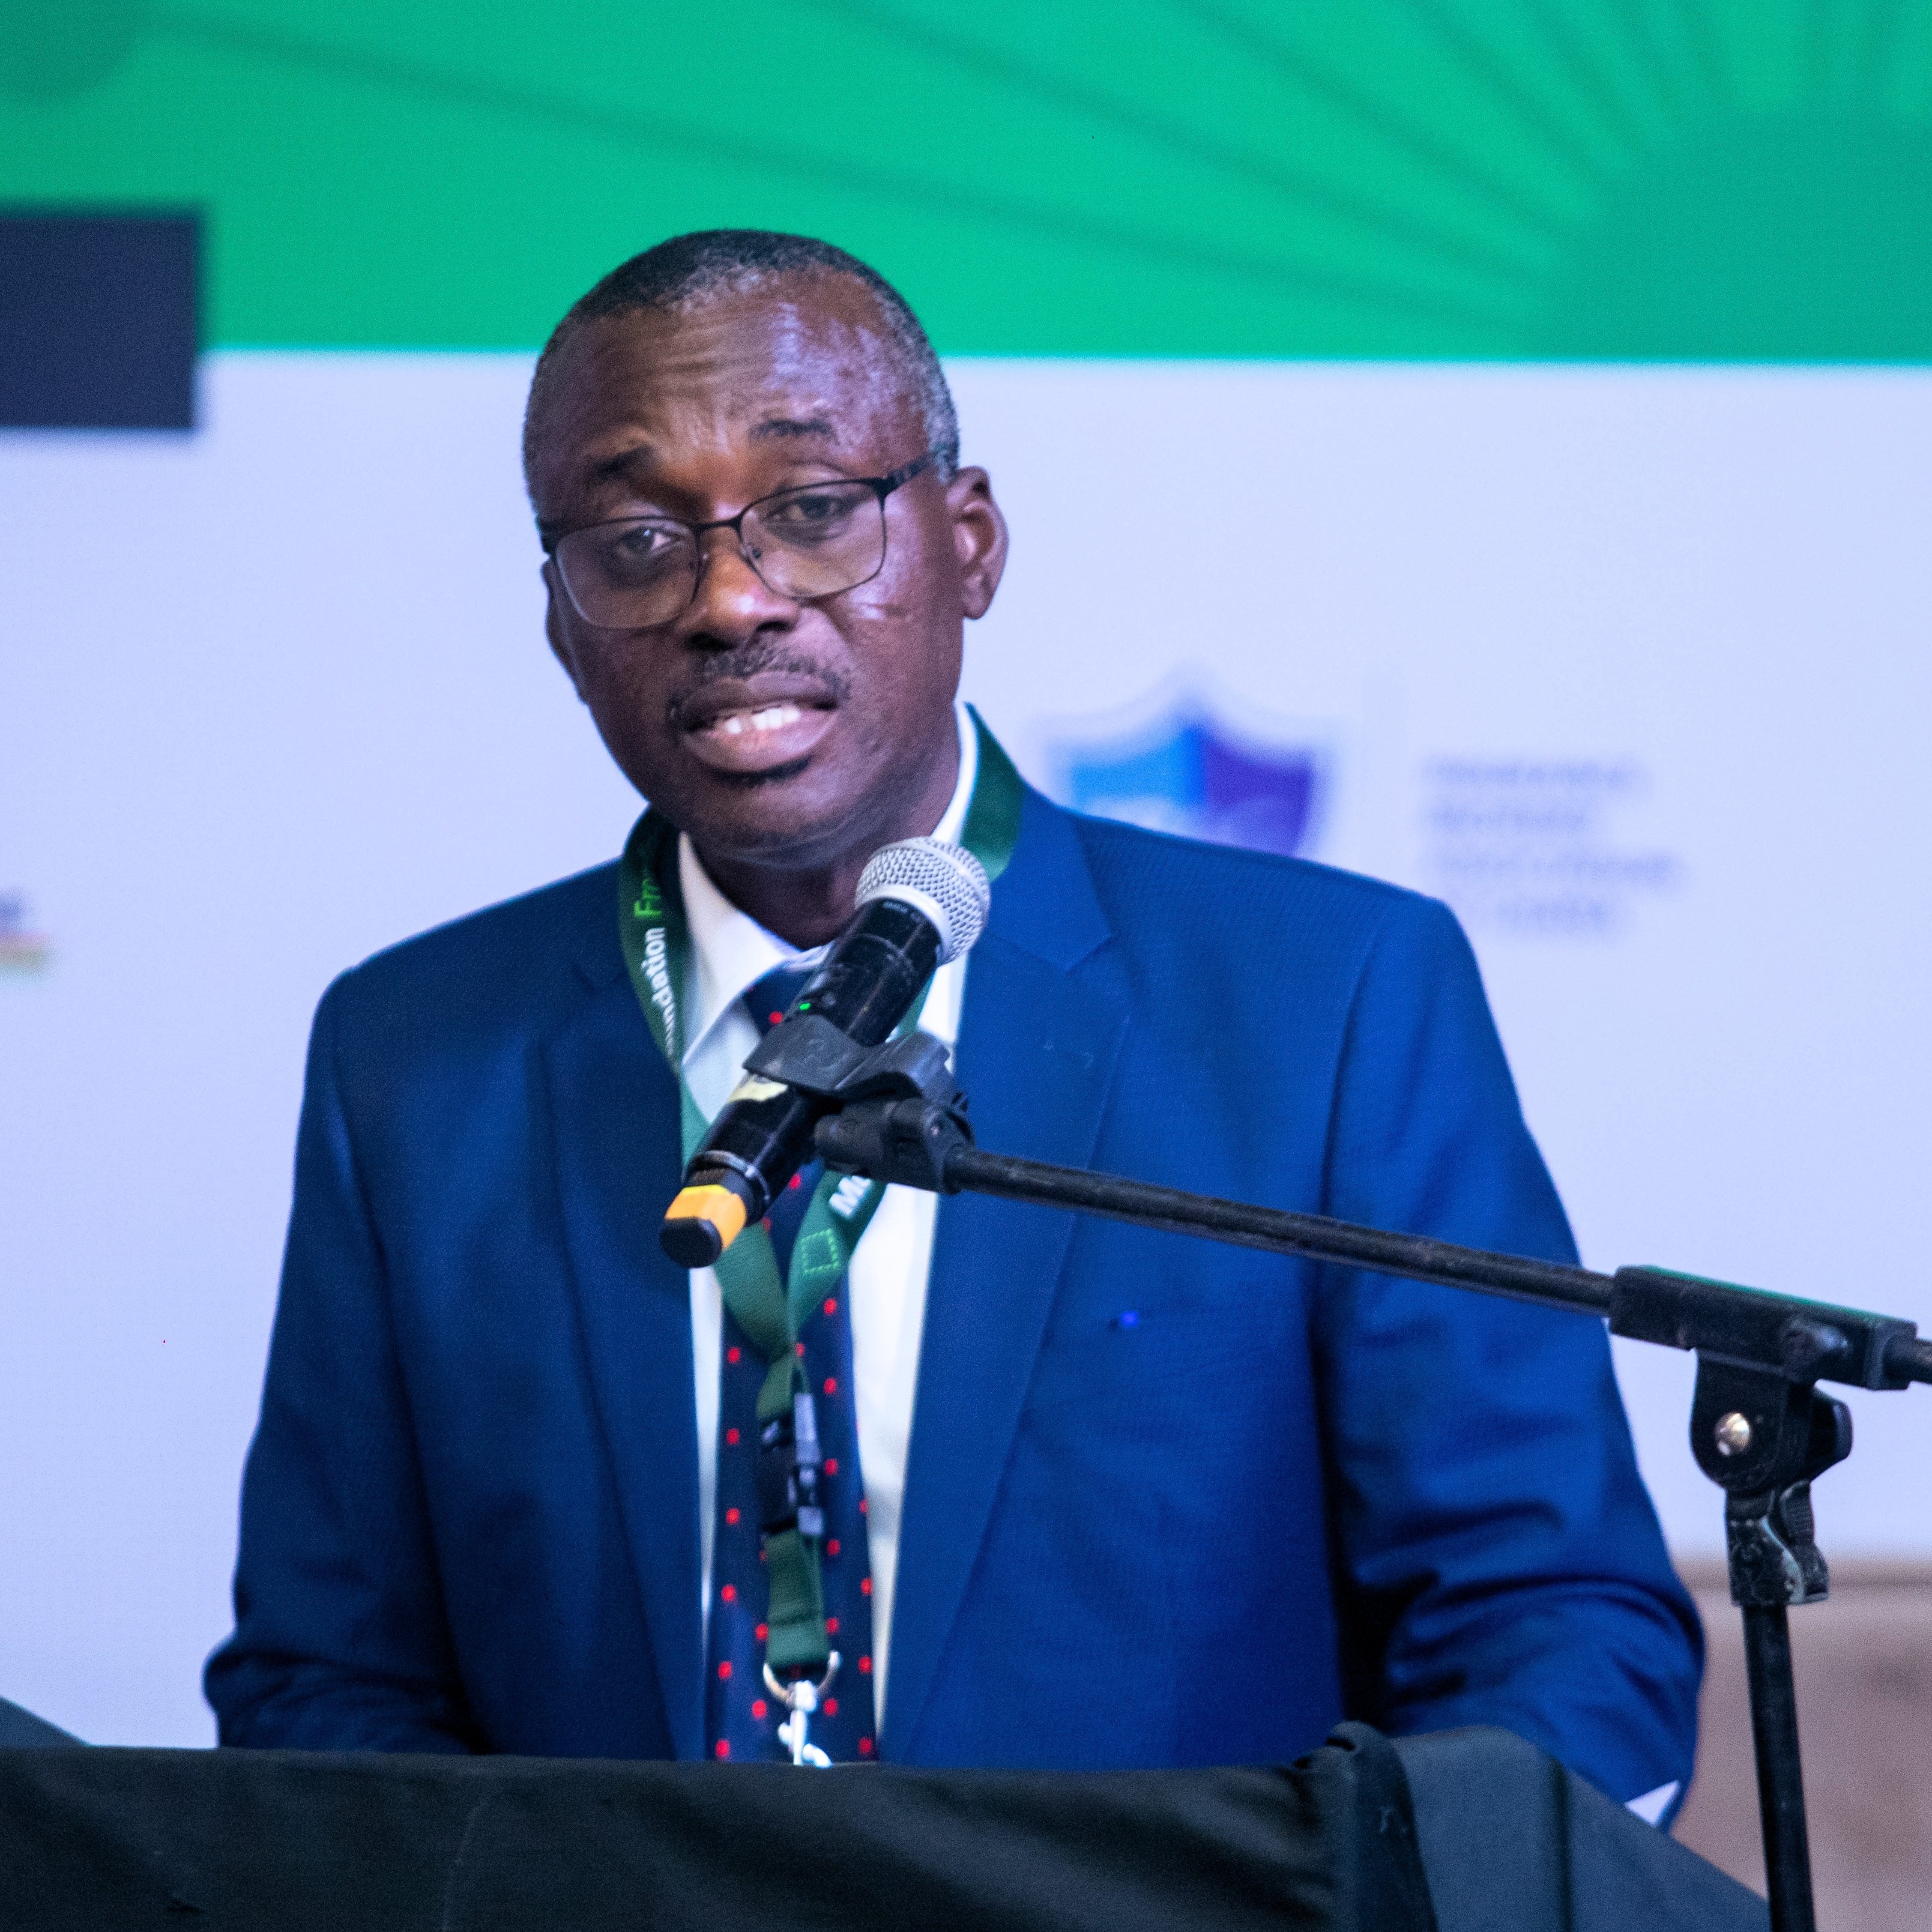 Michael Kofi Andoh, Acting Commissioner of the National Insurance Commission of Ghana